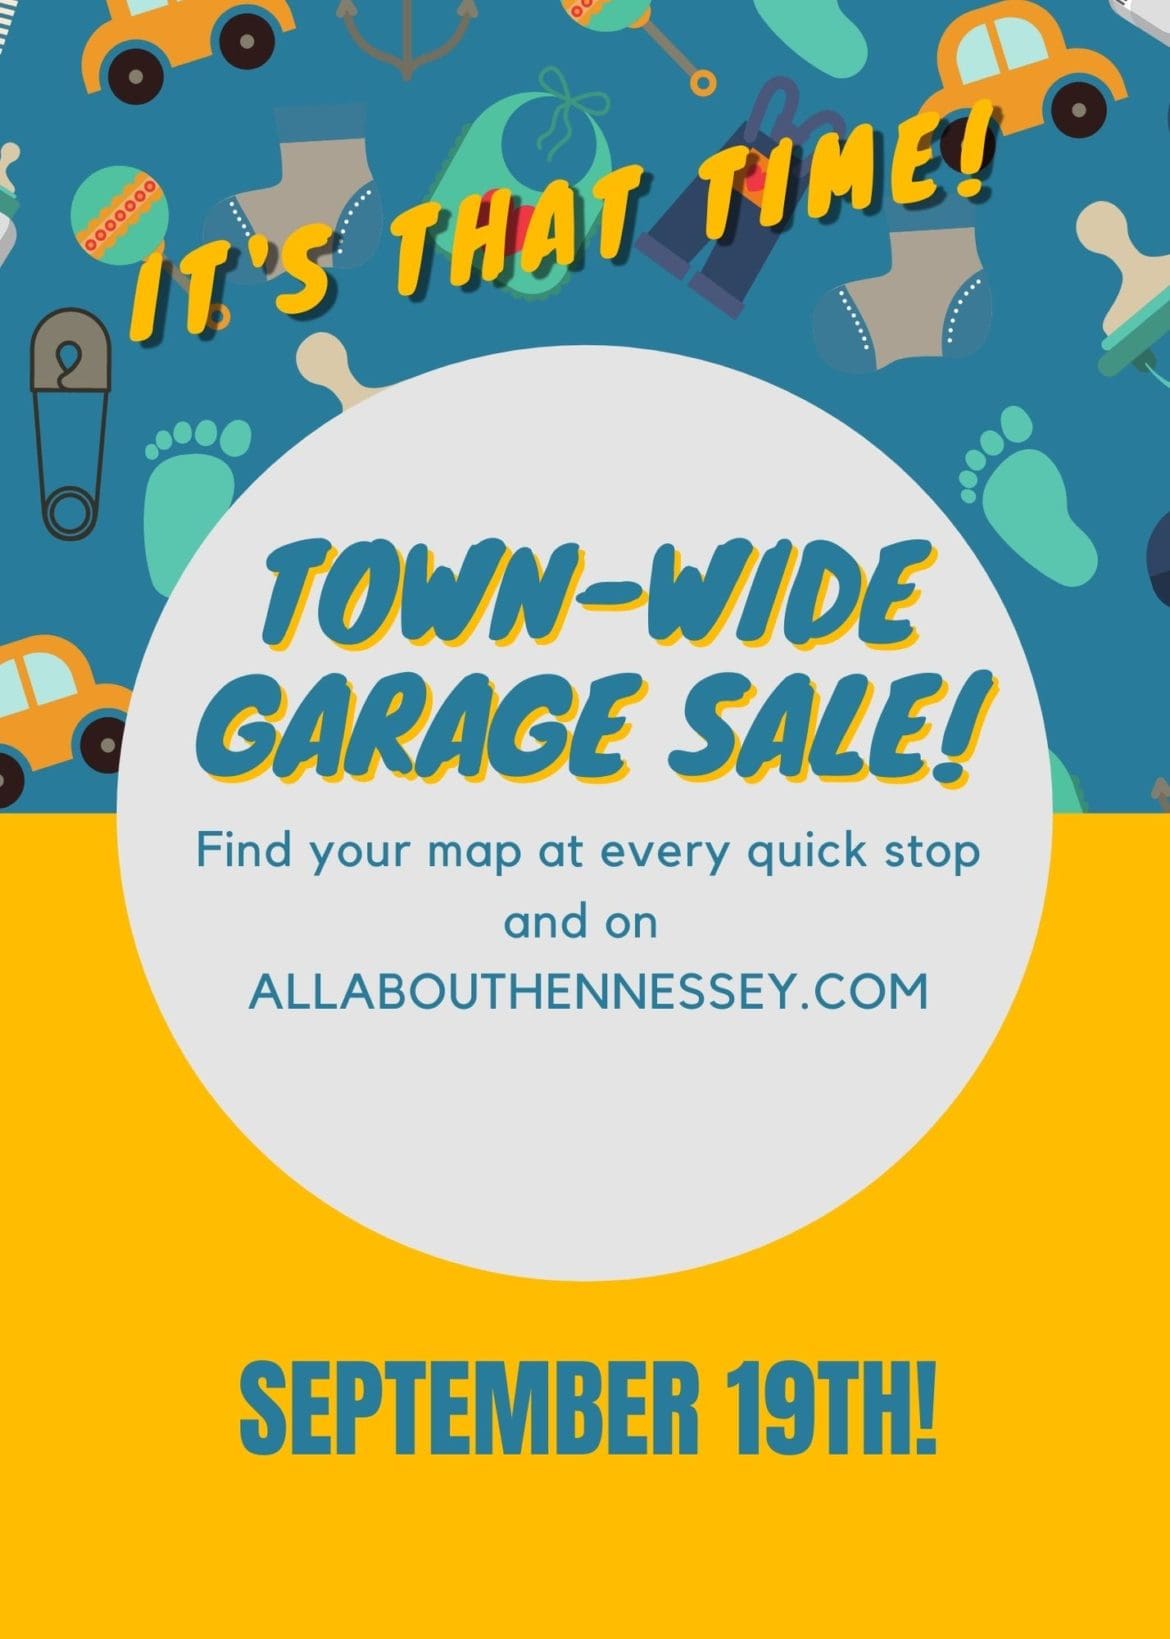 TOWN WIDE GARAGE SALE IS ON!  SEPTEMBER 19TH!